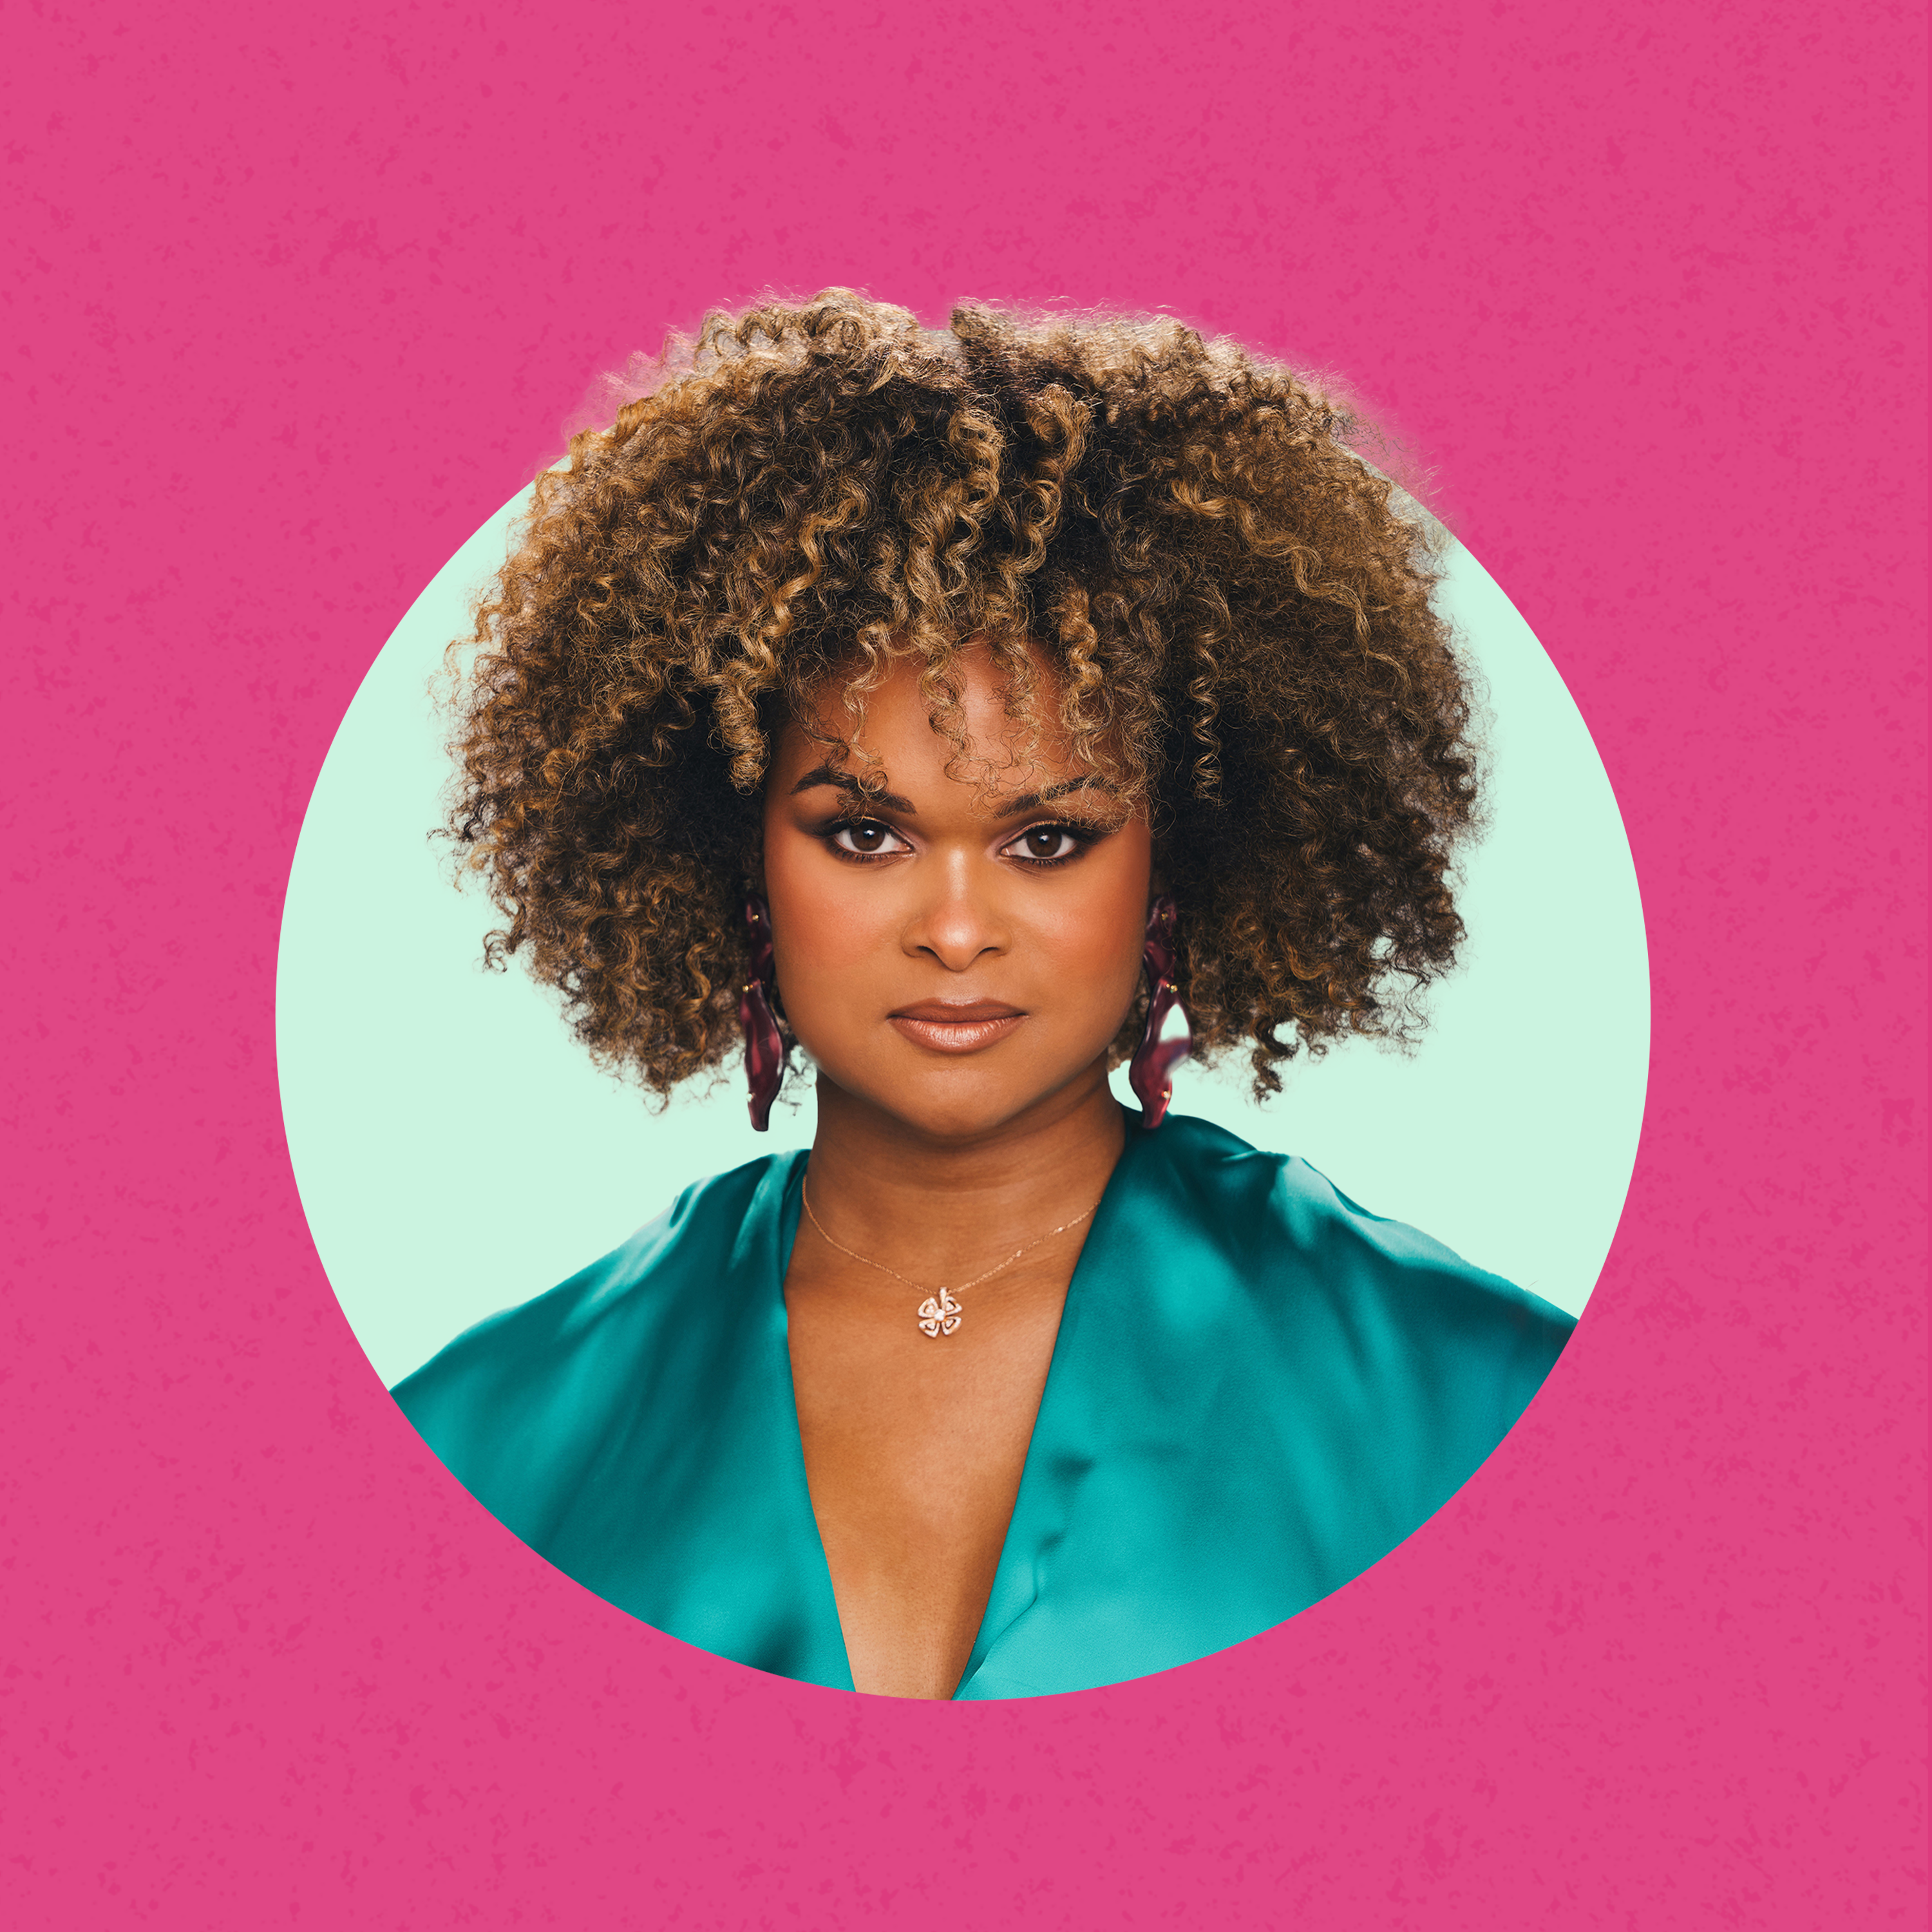 Listen to Your Inner Voice or Suppress It? (with Raquel Willis)